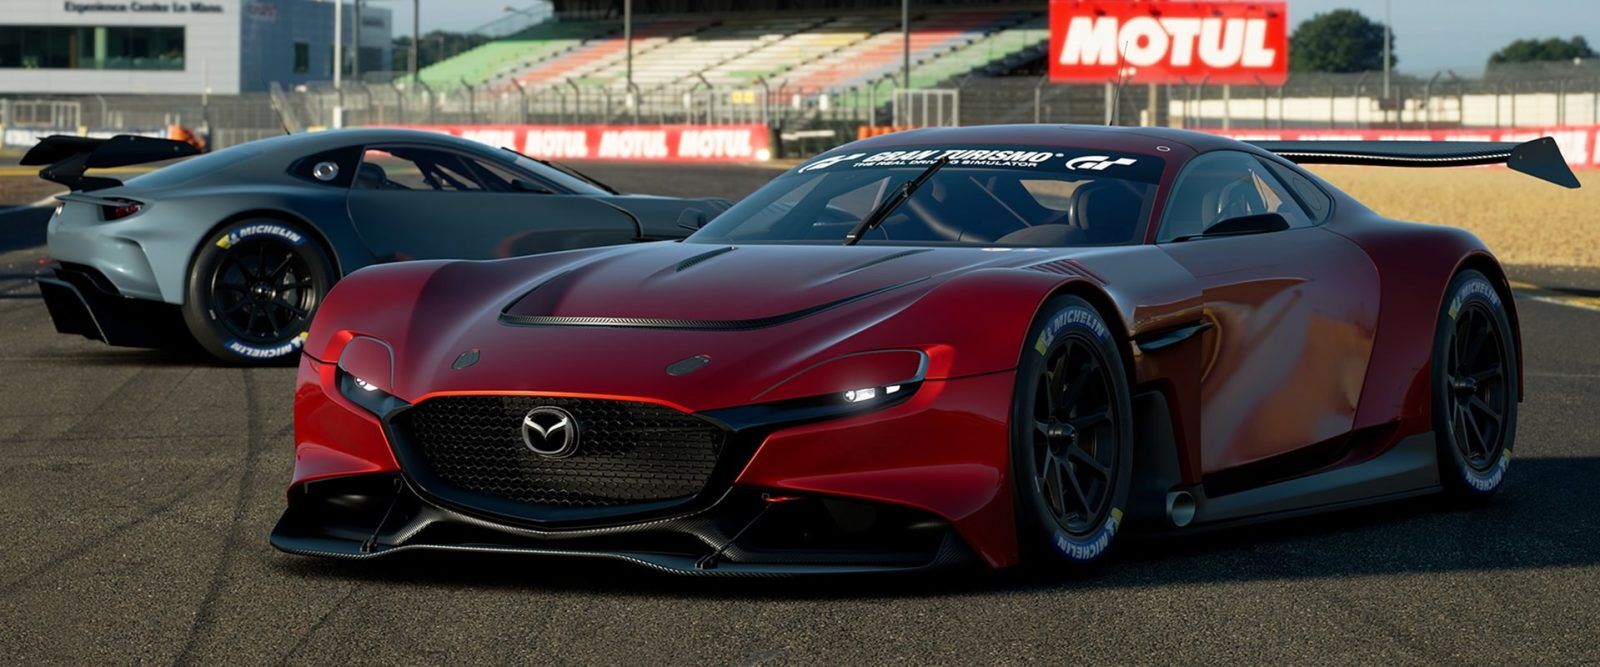 5 racing games we're hoping to see in 2021